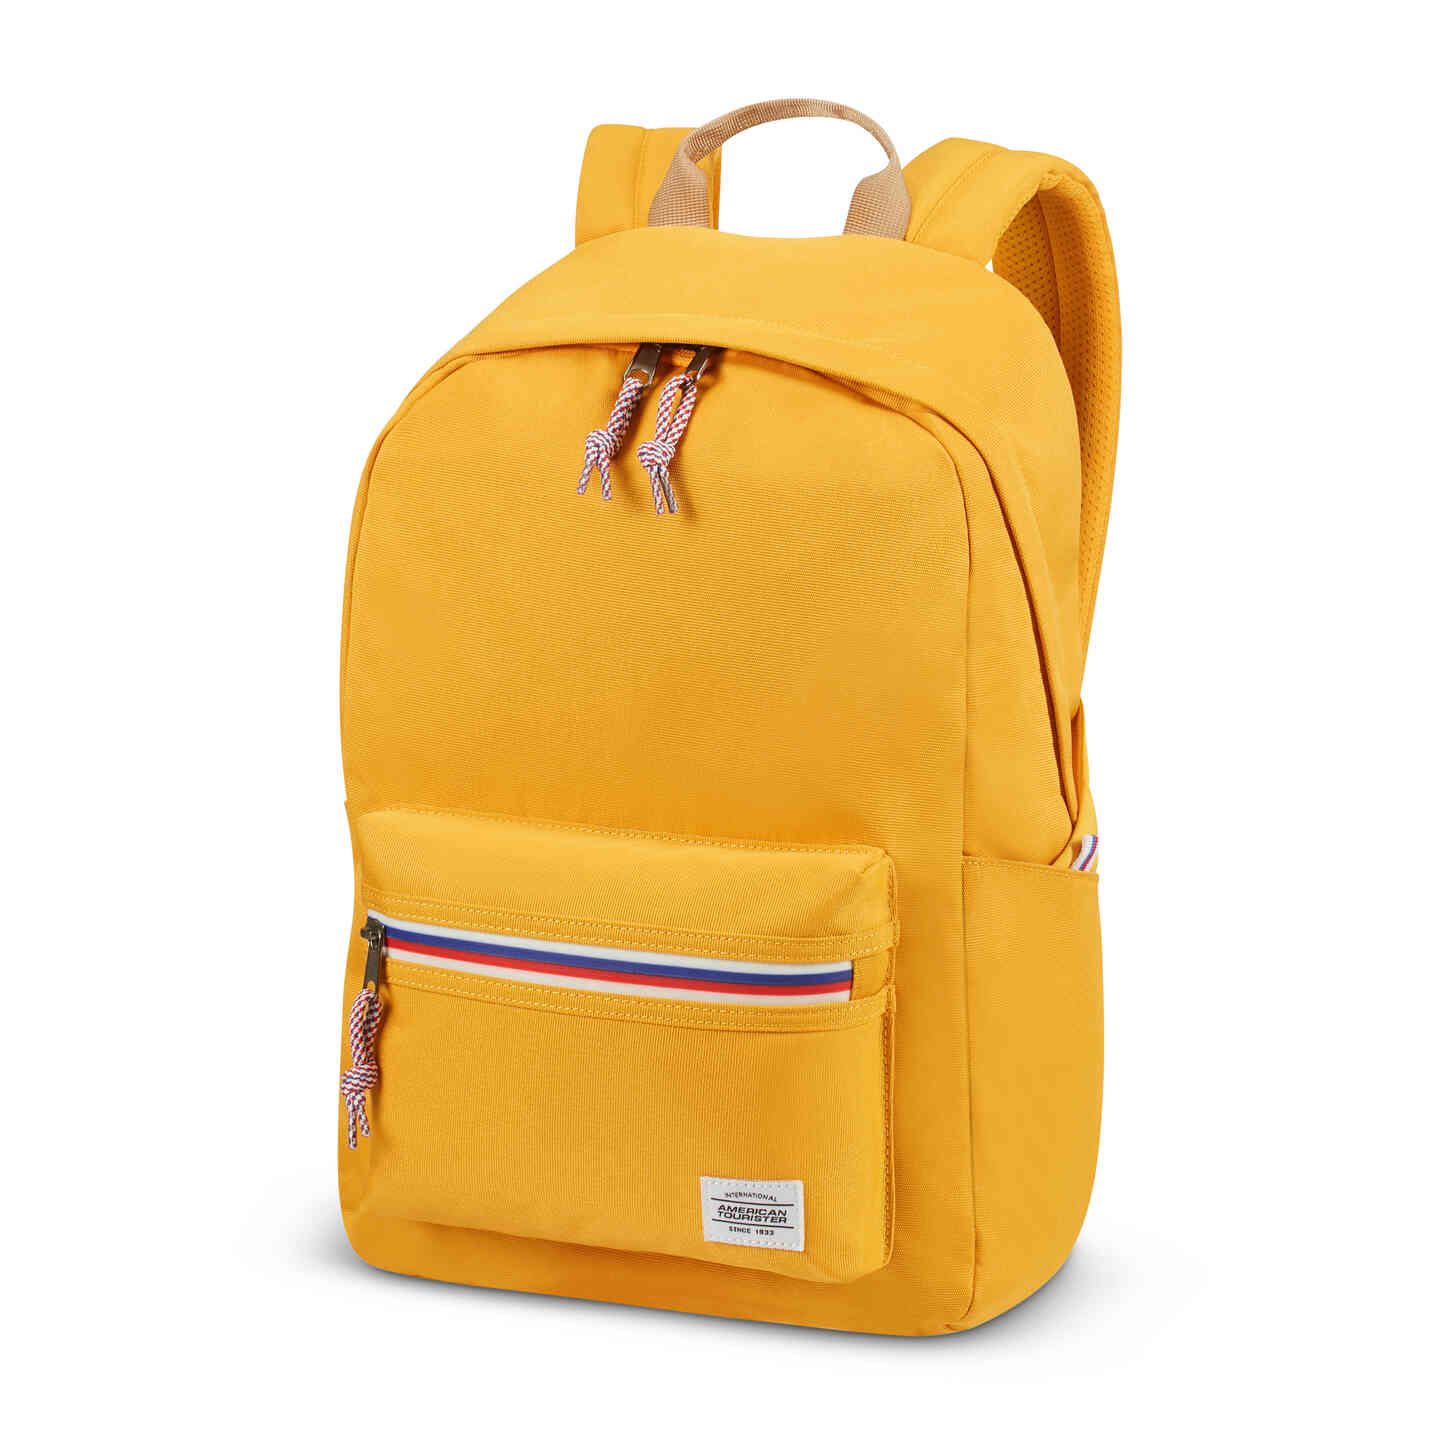 Click here to shop the UpBeat Backpack.